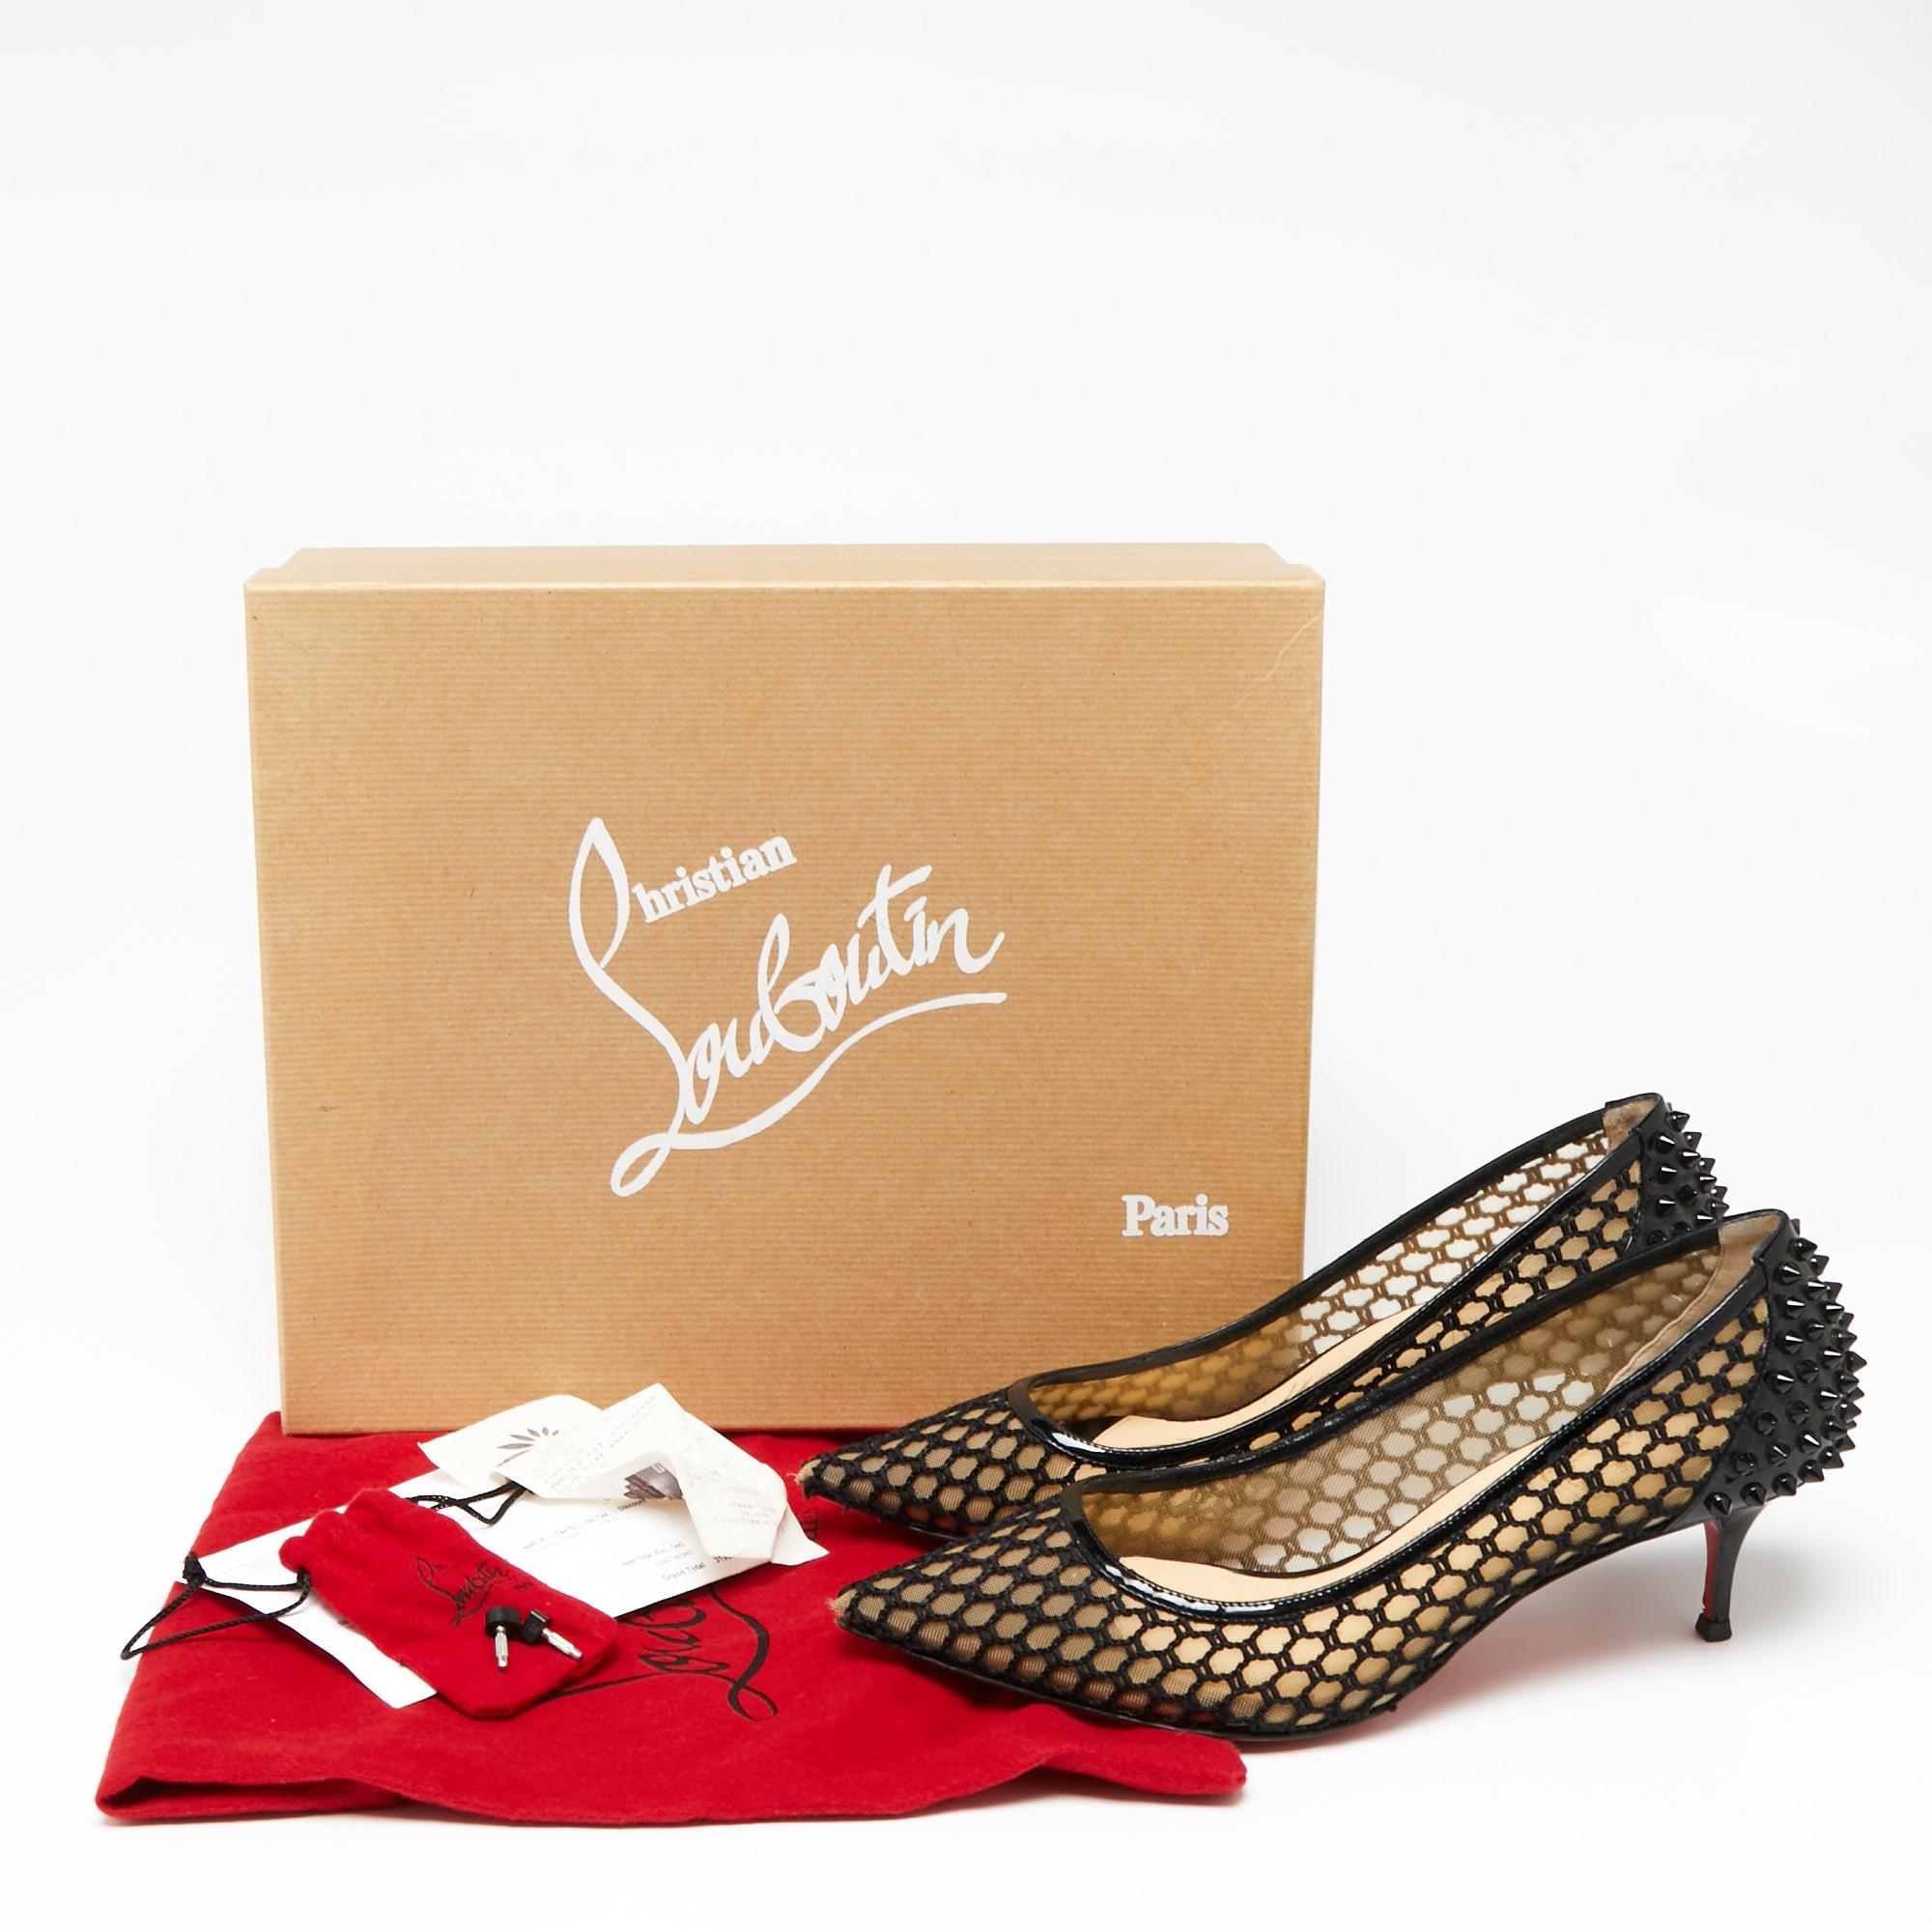 Christian Louboutin Black Mesh and Patent Leather Spike Guni Pumps Size 39.5 For Sale 4